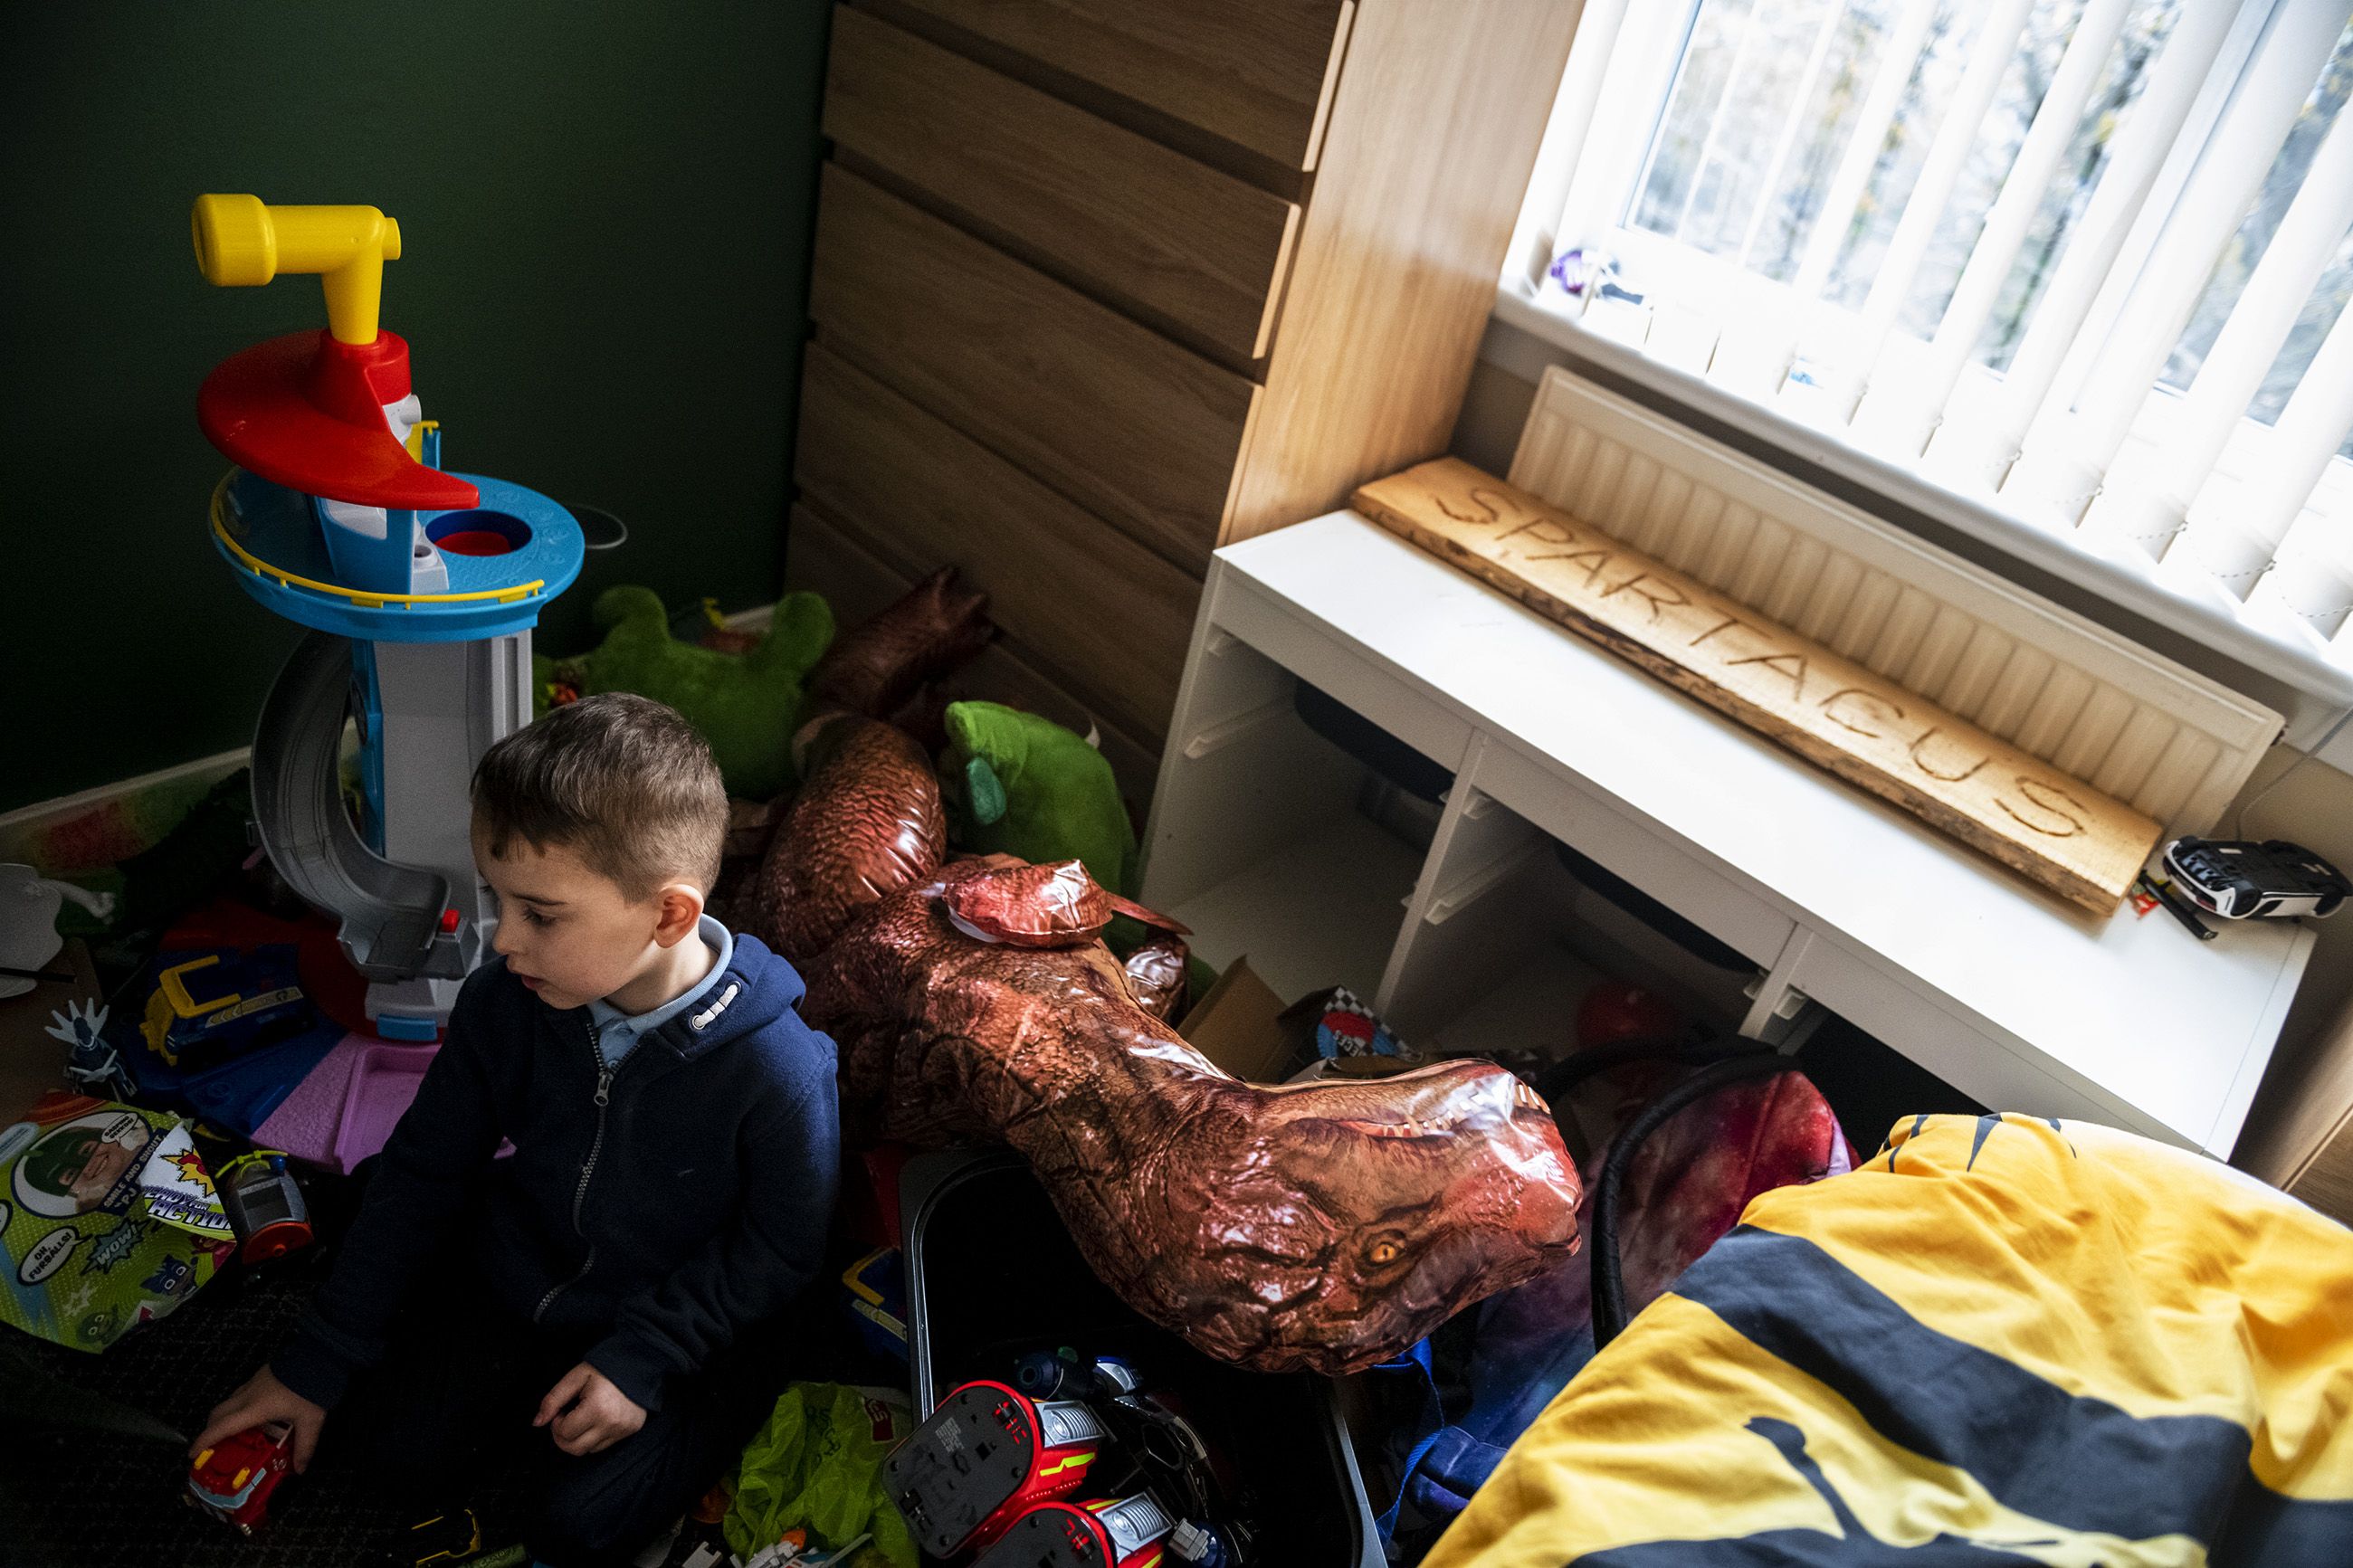 Spartacus Summers, 5, of Faifley, stares quietly out of his room while playing with a toy truck. Image by Michael Santiago. Scotland, 2019.